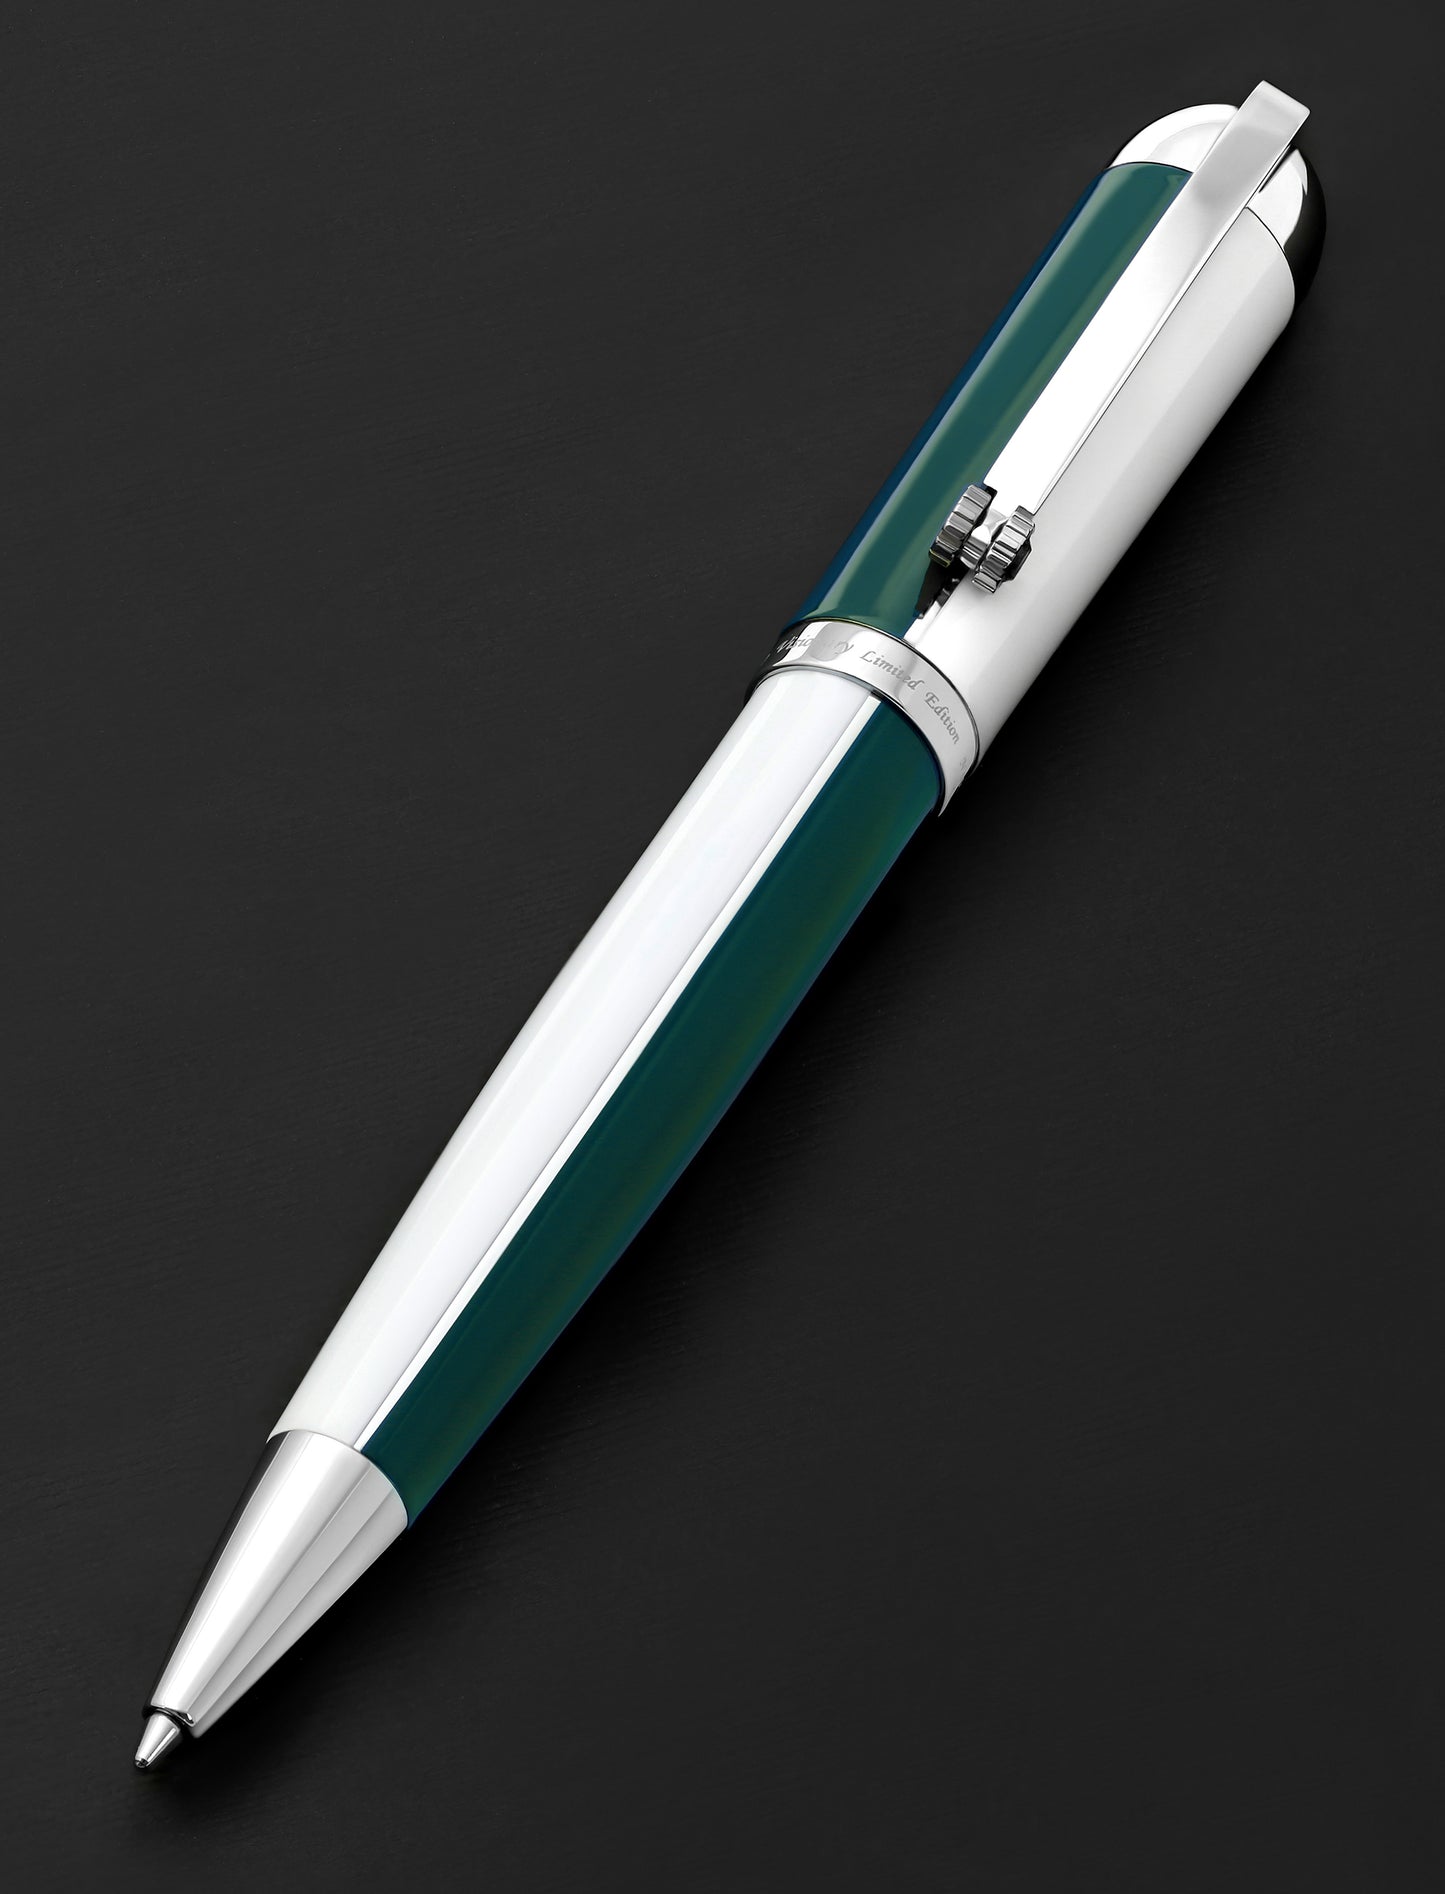 Xezo - Overview of the front of the Visionary Teal Green/White B ballpoint pen in twisted-tip position